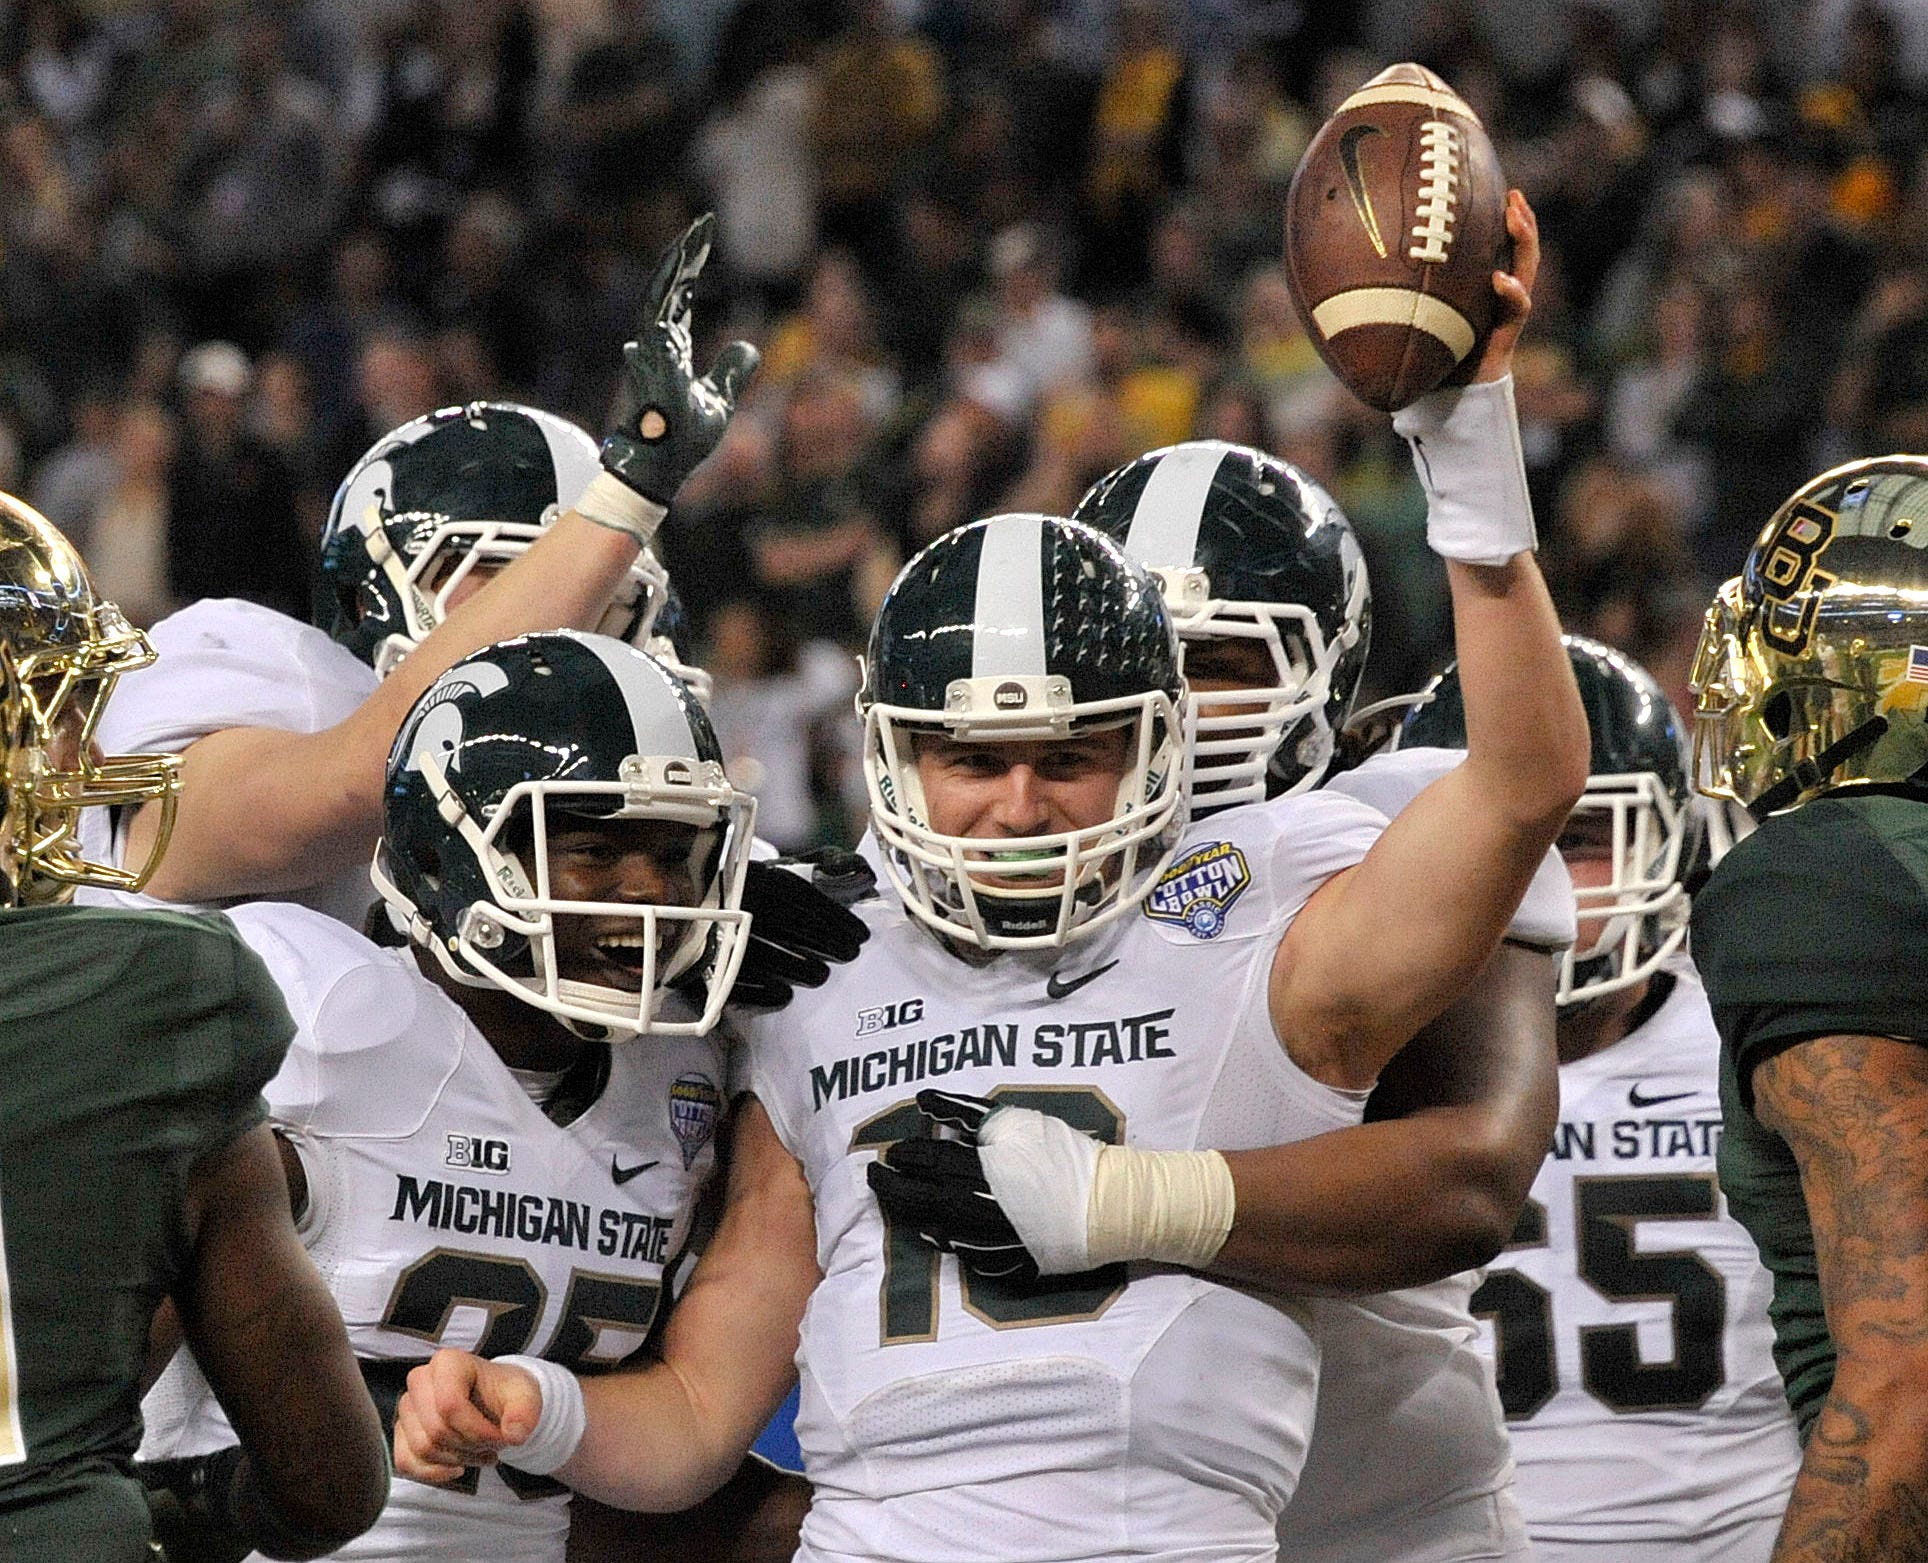 Go through the gallery to see who The Detroit News picked as Michigan State’s best football players for the past 25 years, compiled by Matt Charboneau.